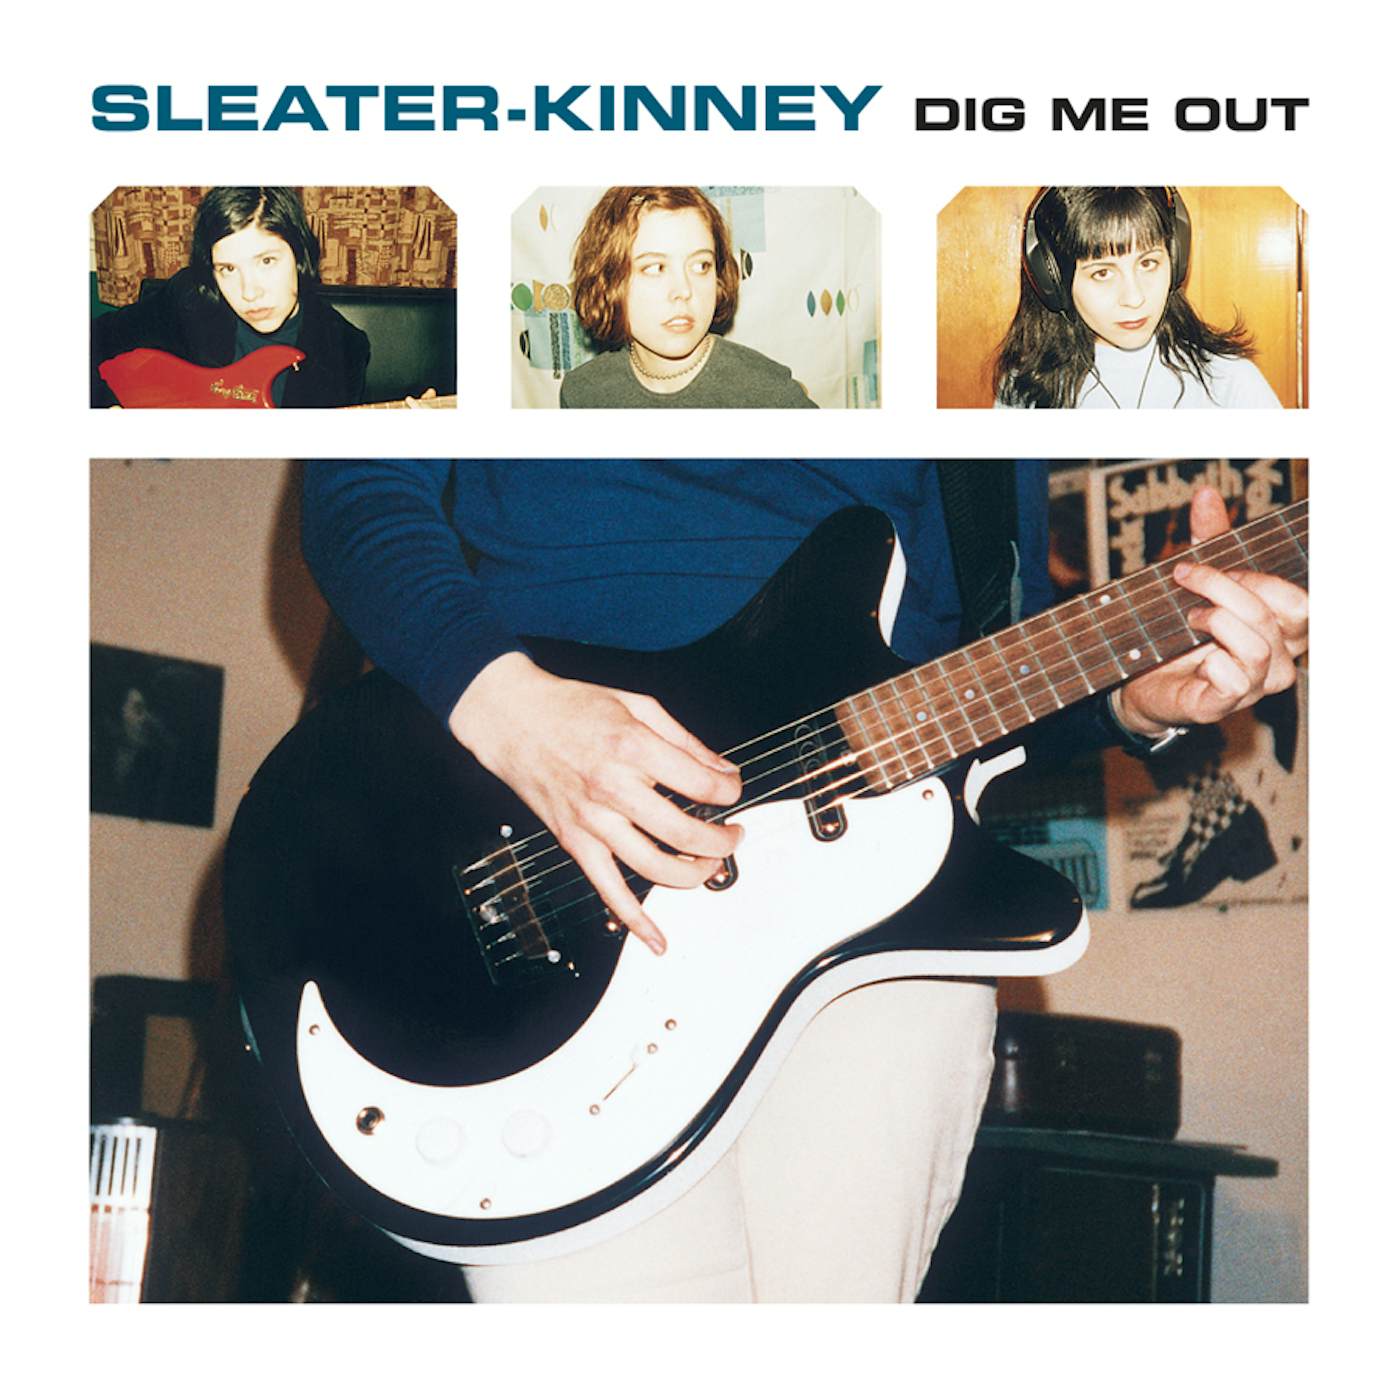 Sleater-Kinney DIG ME OUT CD